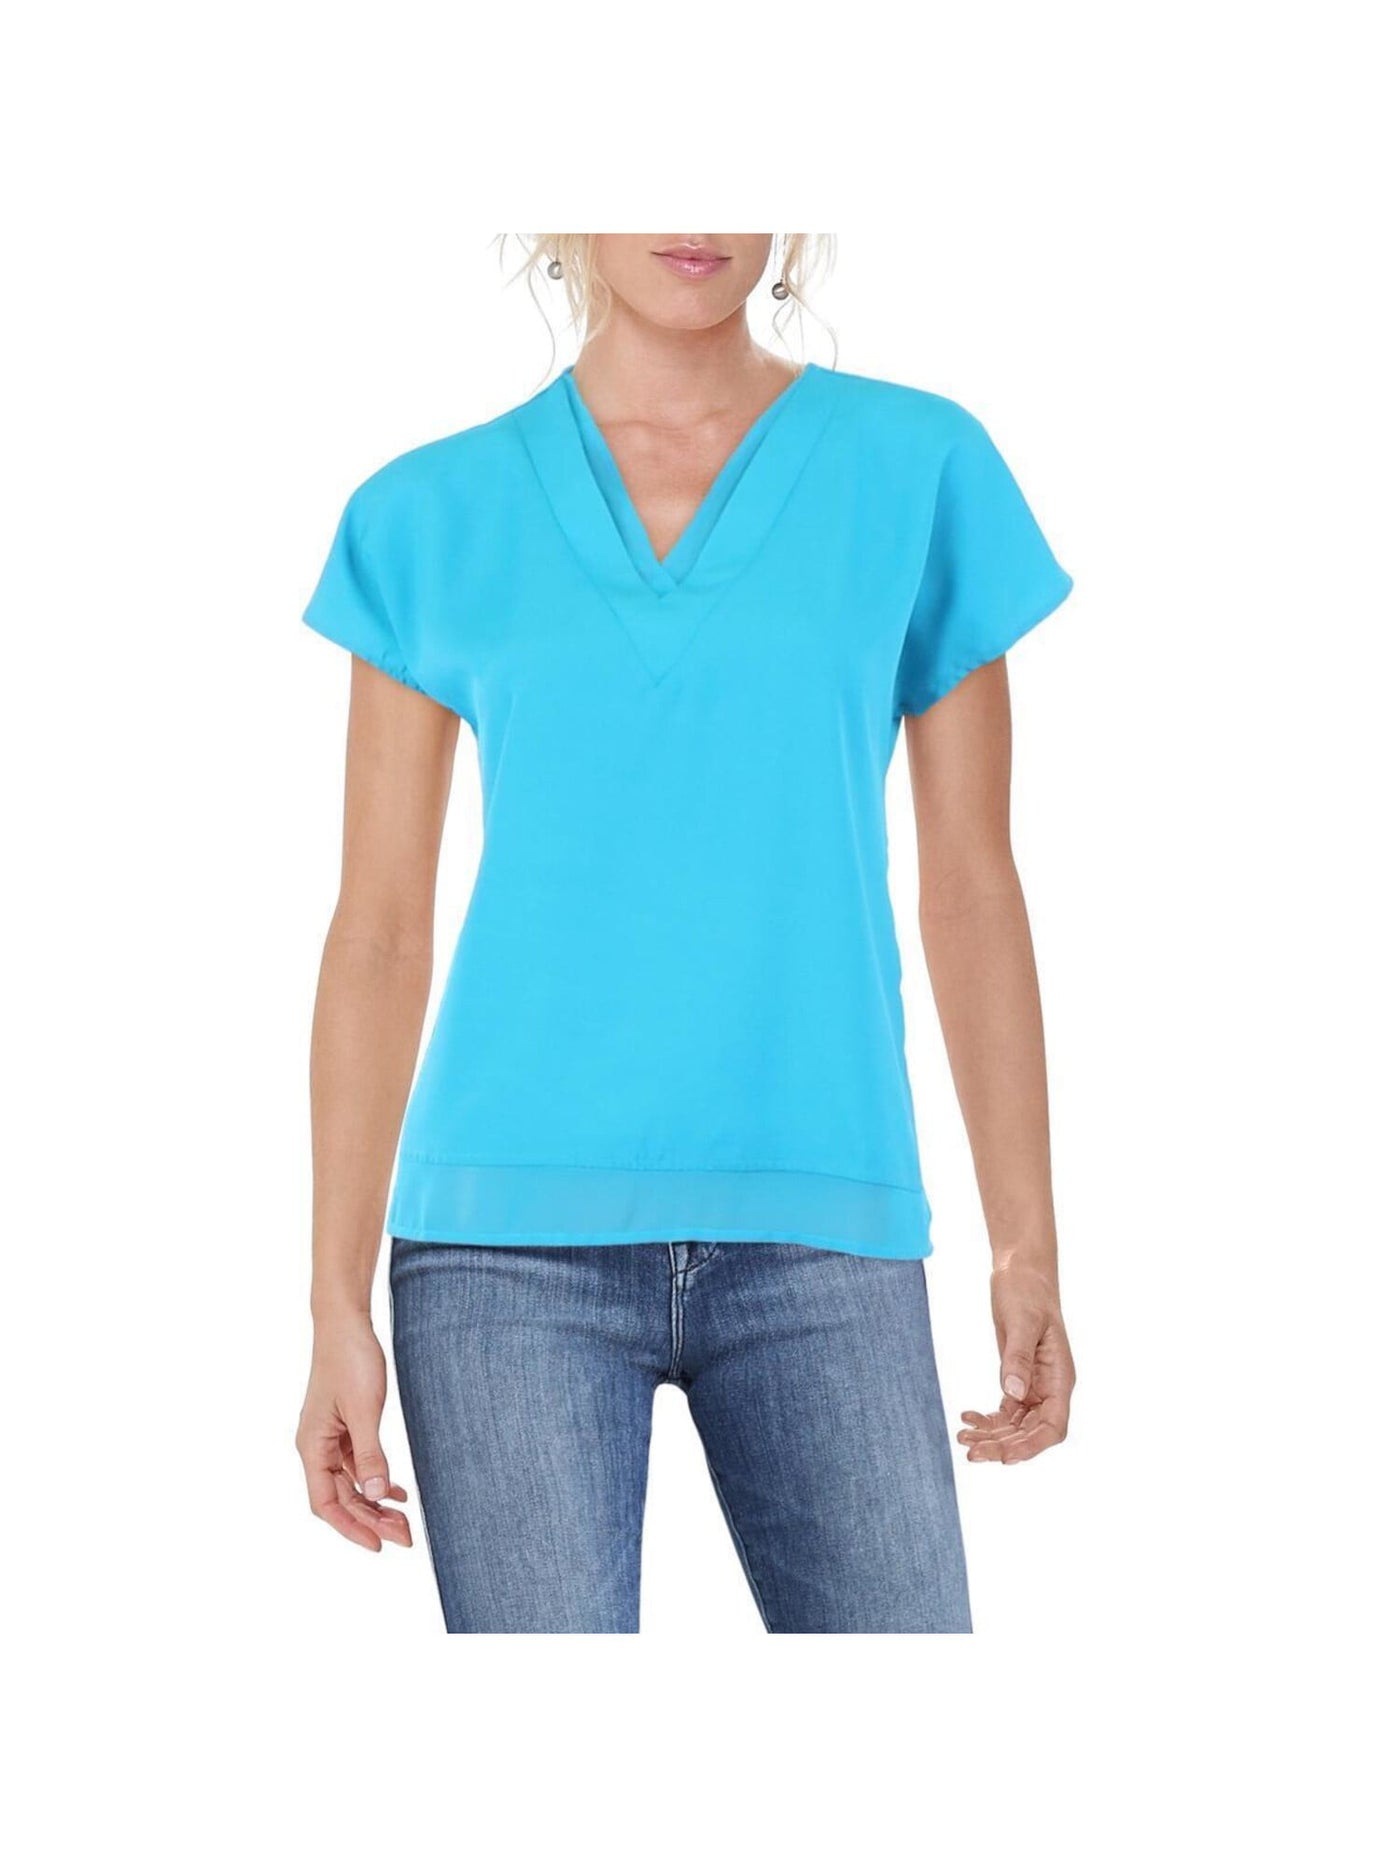 DKNY Womens Turquoise Textured Faux Layered Vented Hem Short Sleeve V Neck Wear To Work Top M